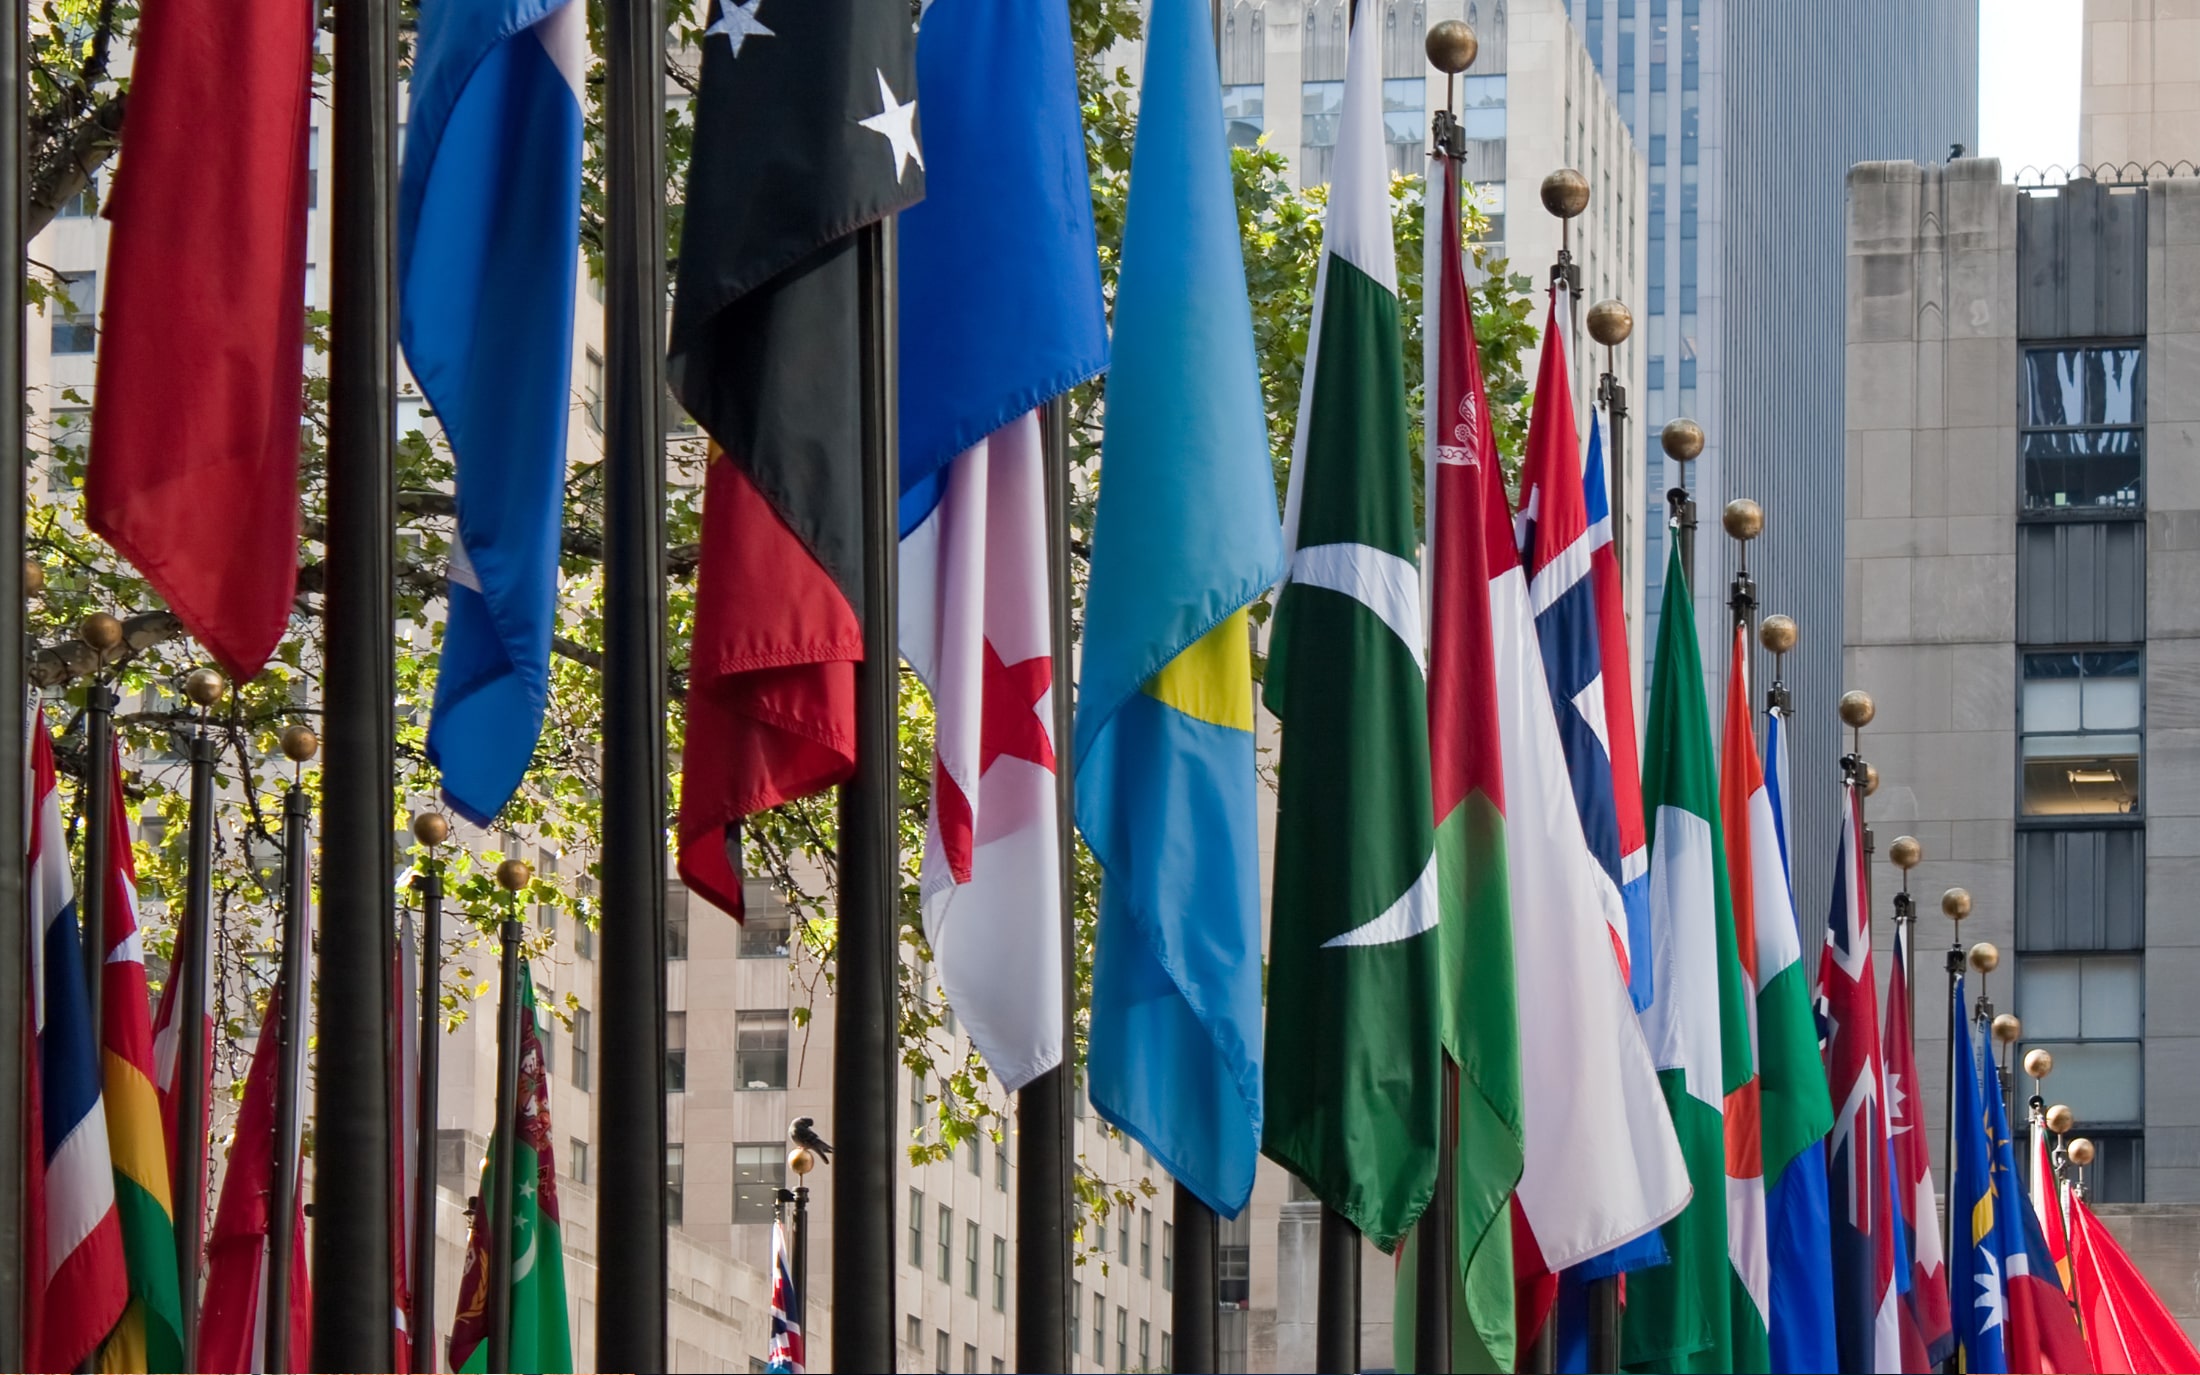 Photo of various flags